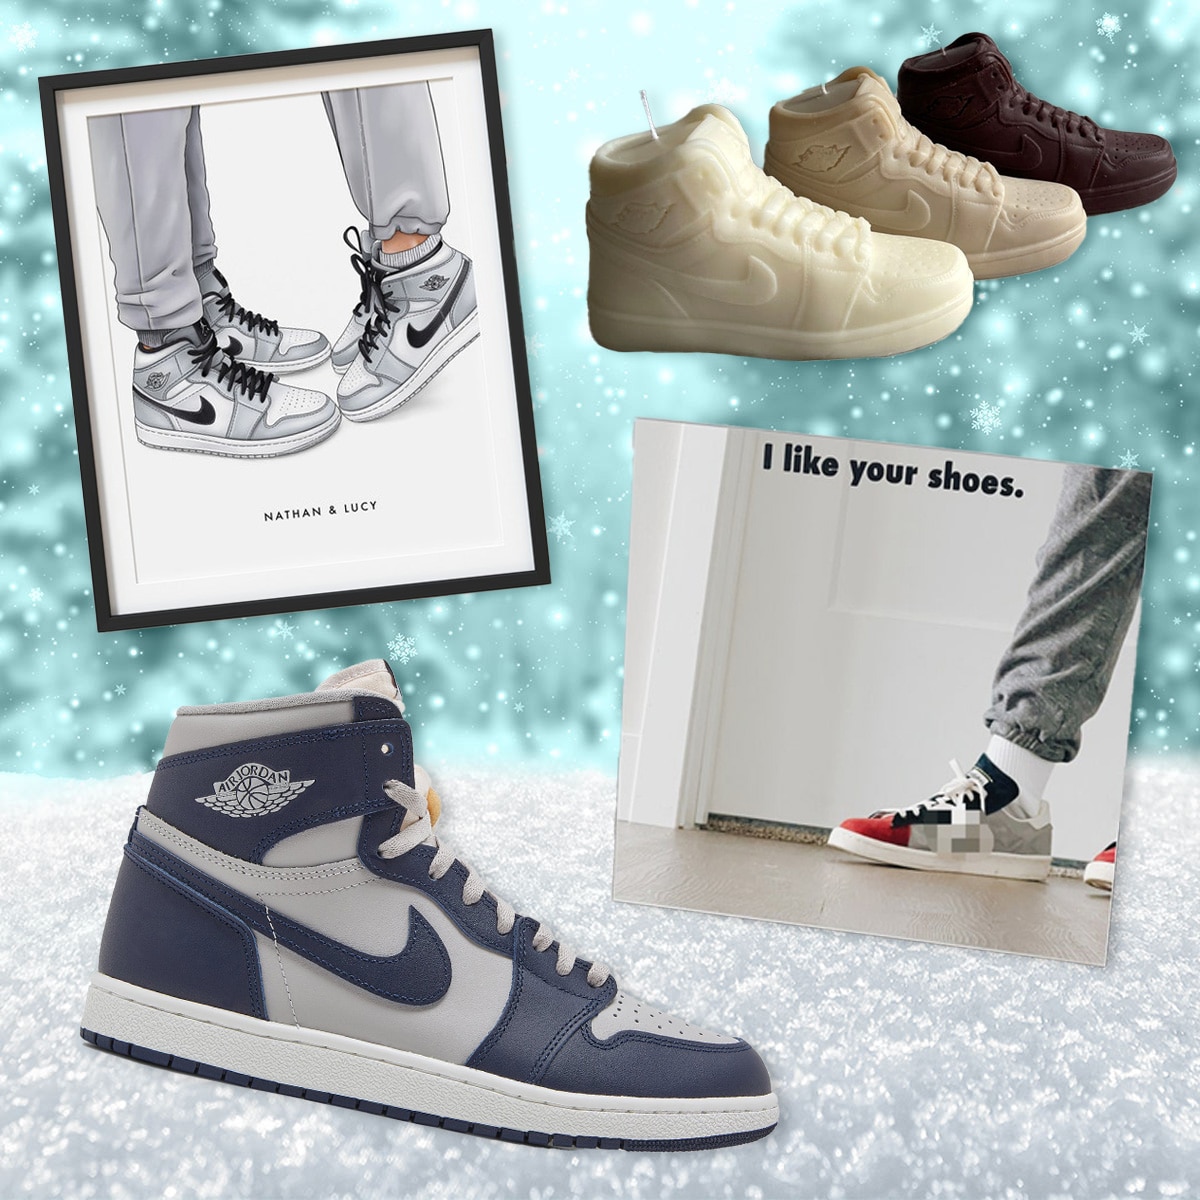 Top 10 Gifts for Sneakerheads that arent Sneakers  OnPoint Gift Ideas